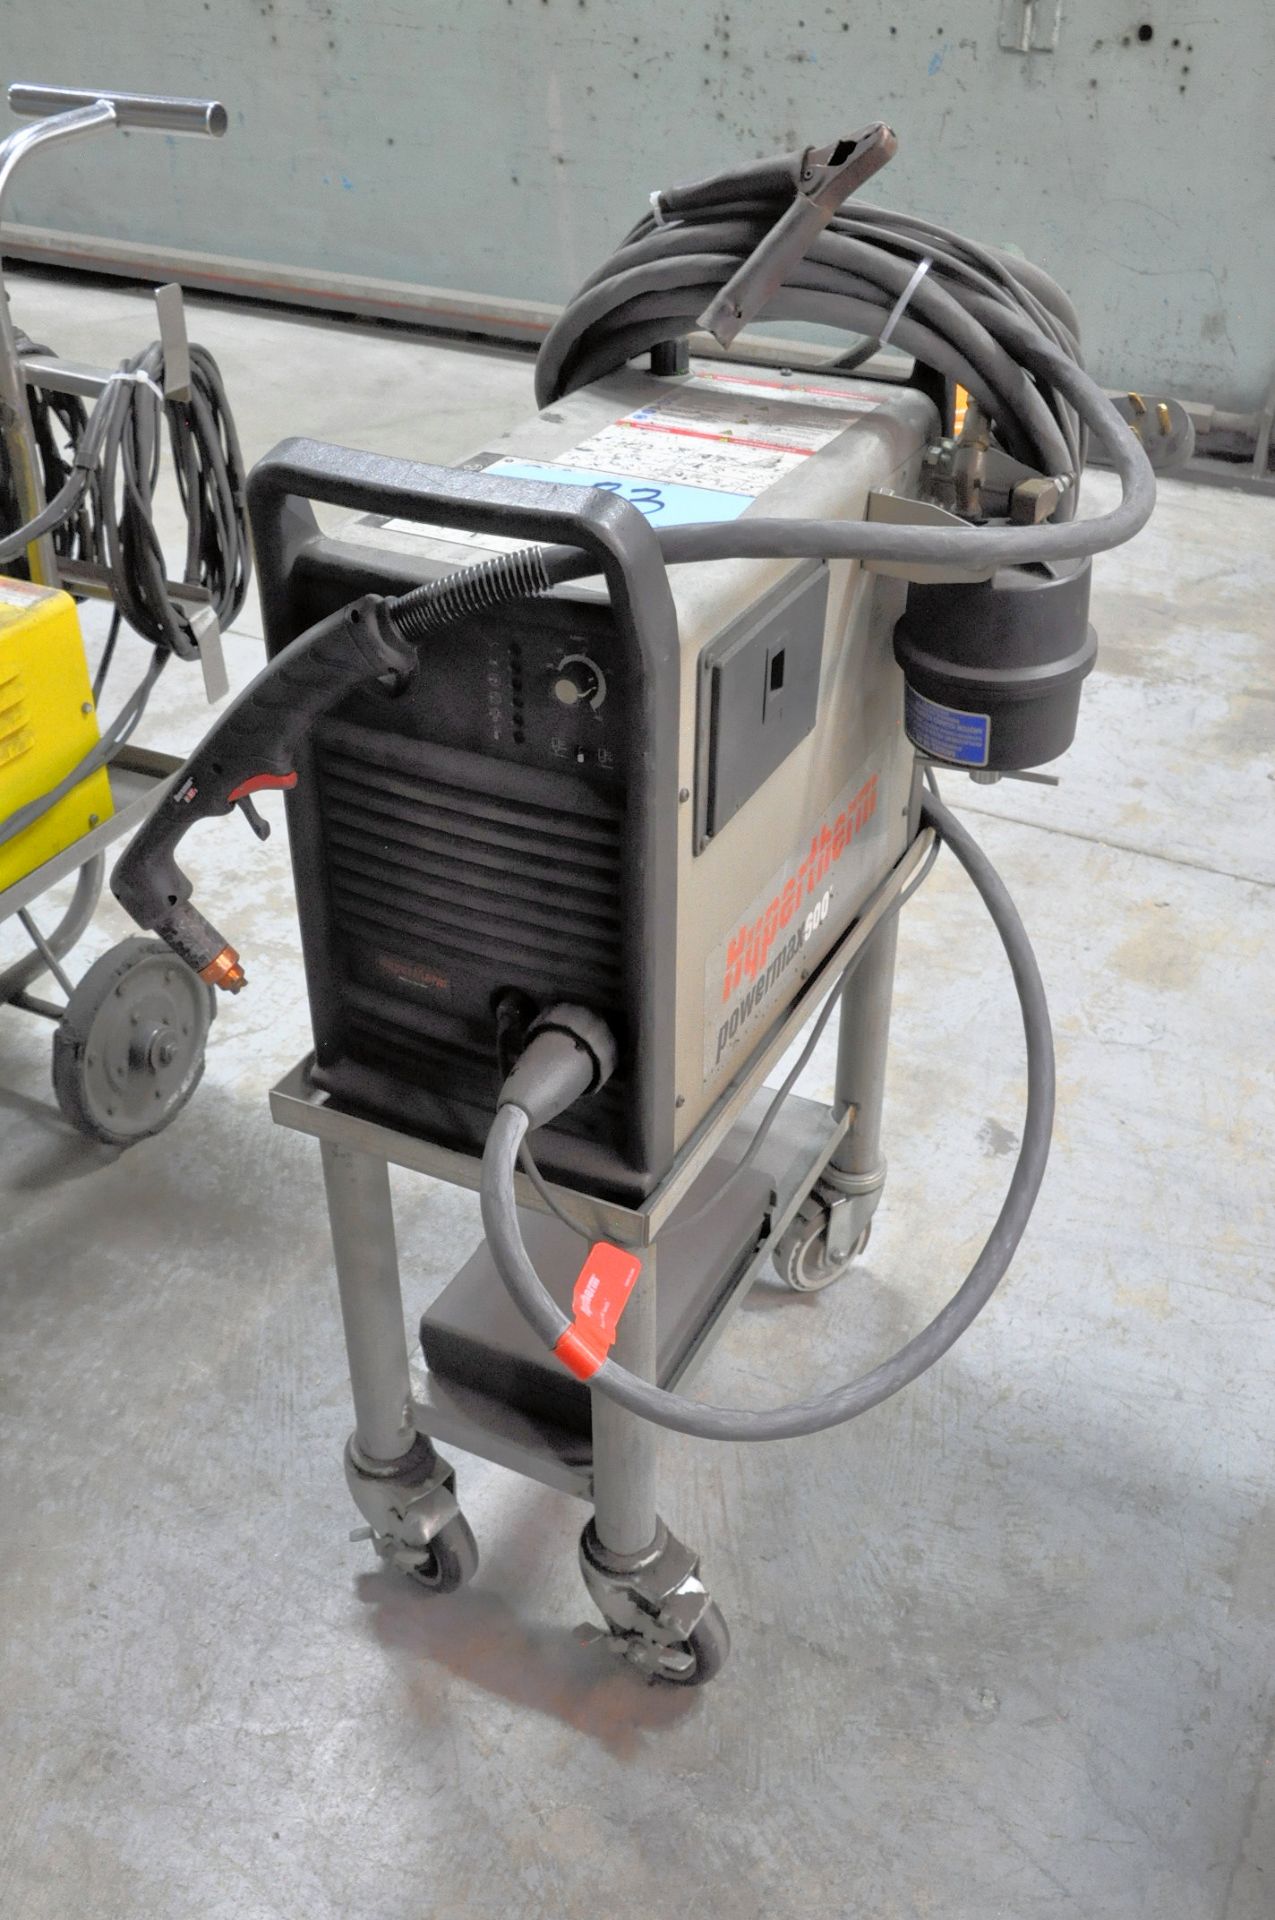 Hypertherm Powermax 600, Portable Plasma Cutting System, with Cart Complete with Consumables - Image 2 of 4